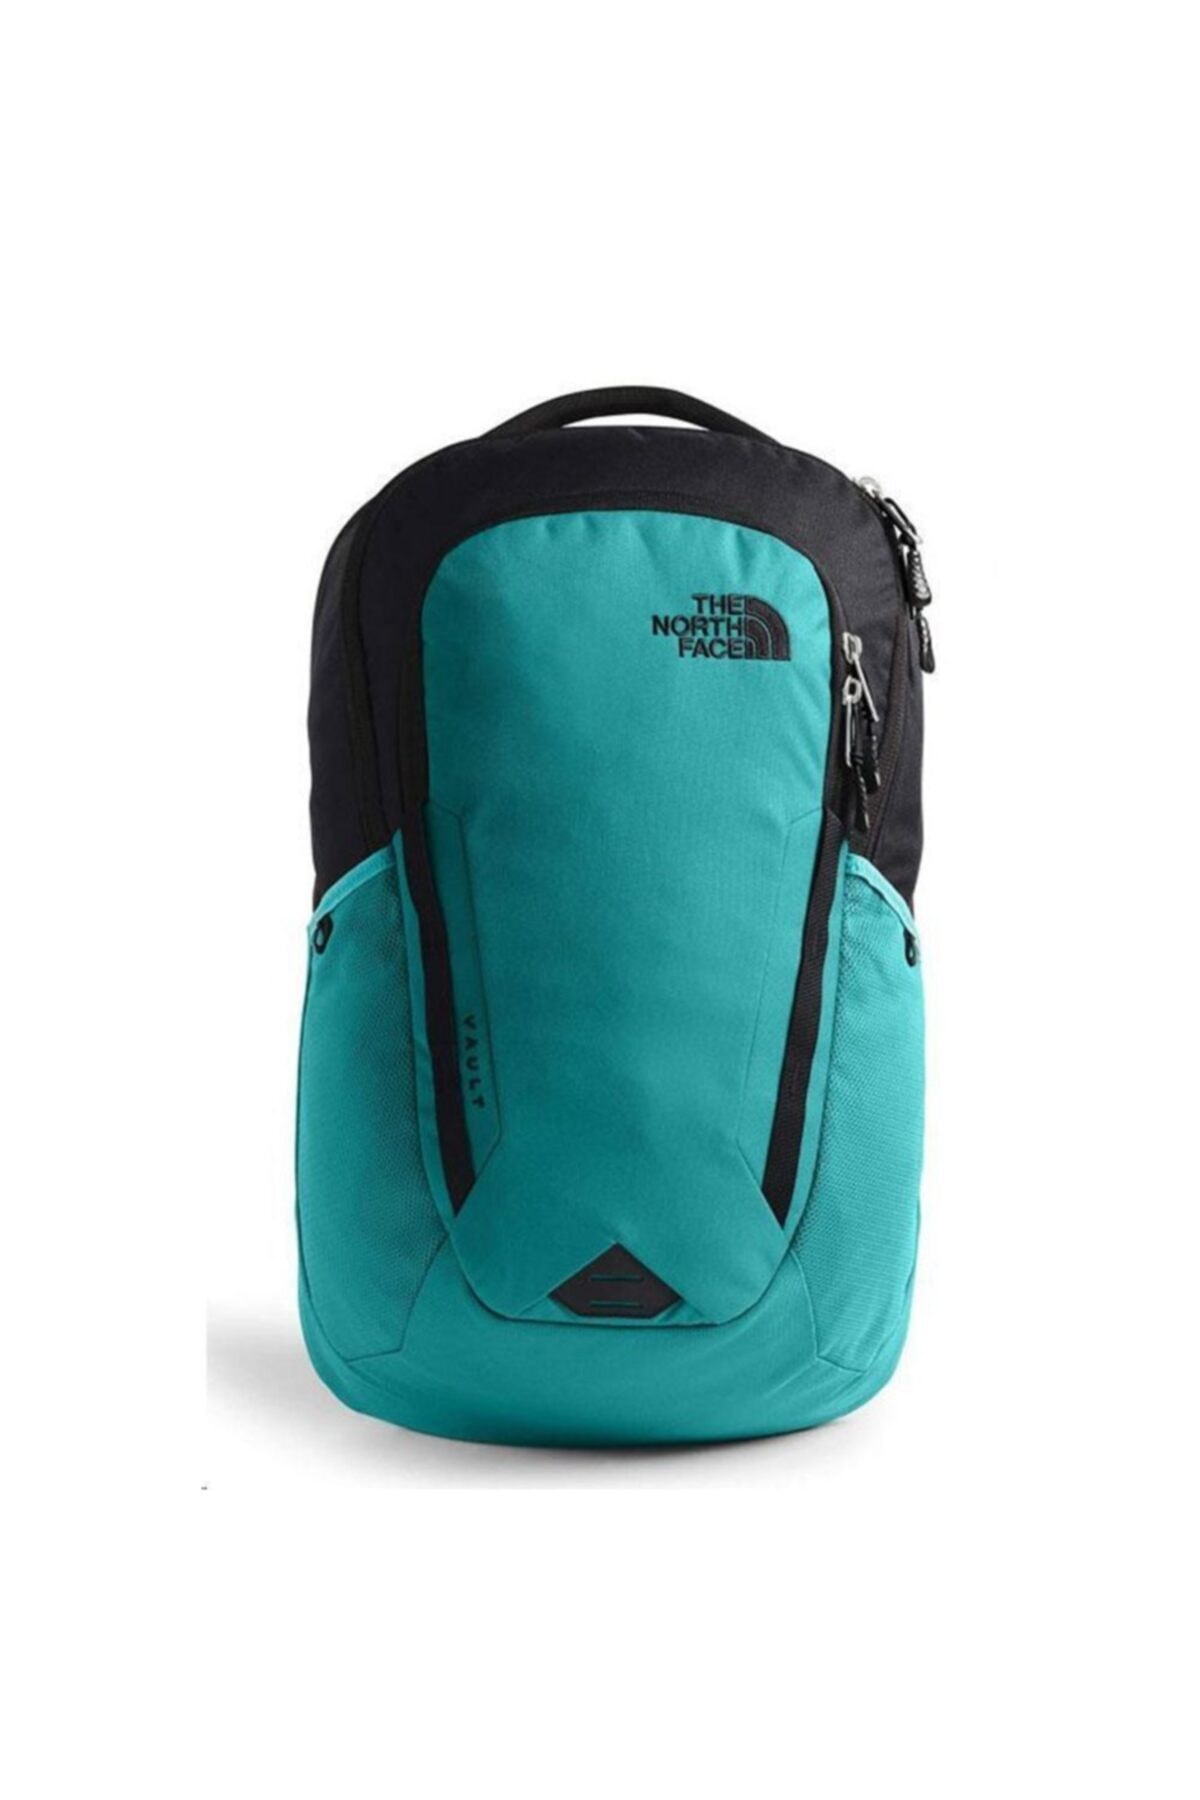 THE NORTH FACE The Northface Vault Nf0a3kv9nx61